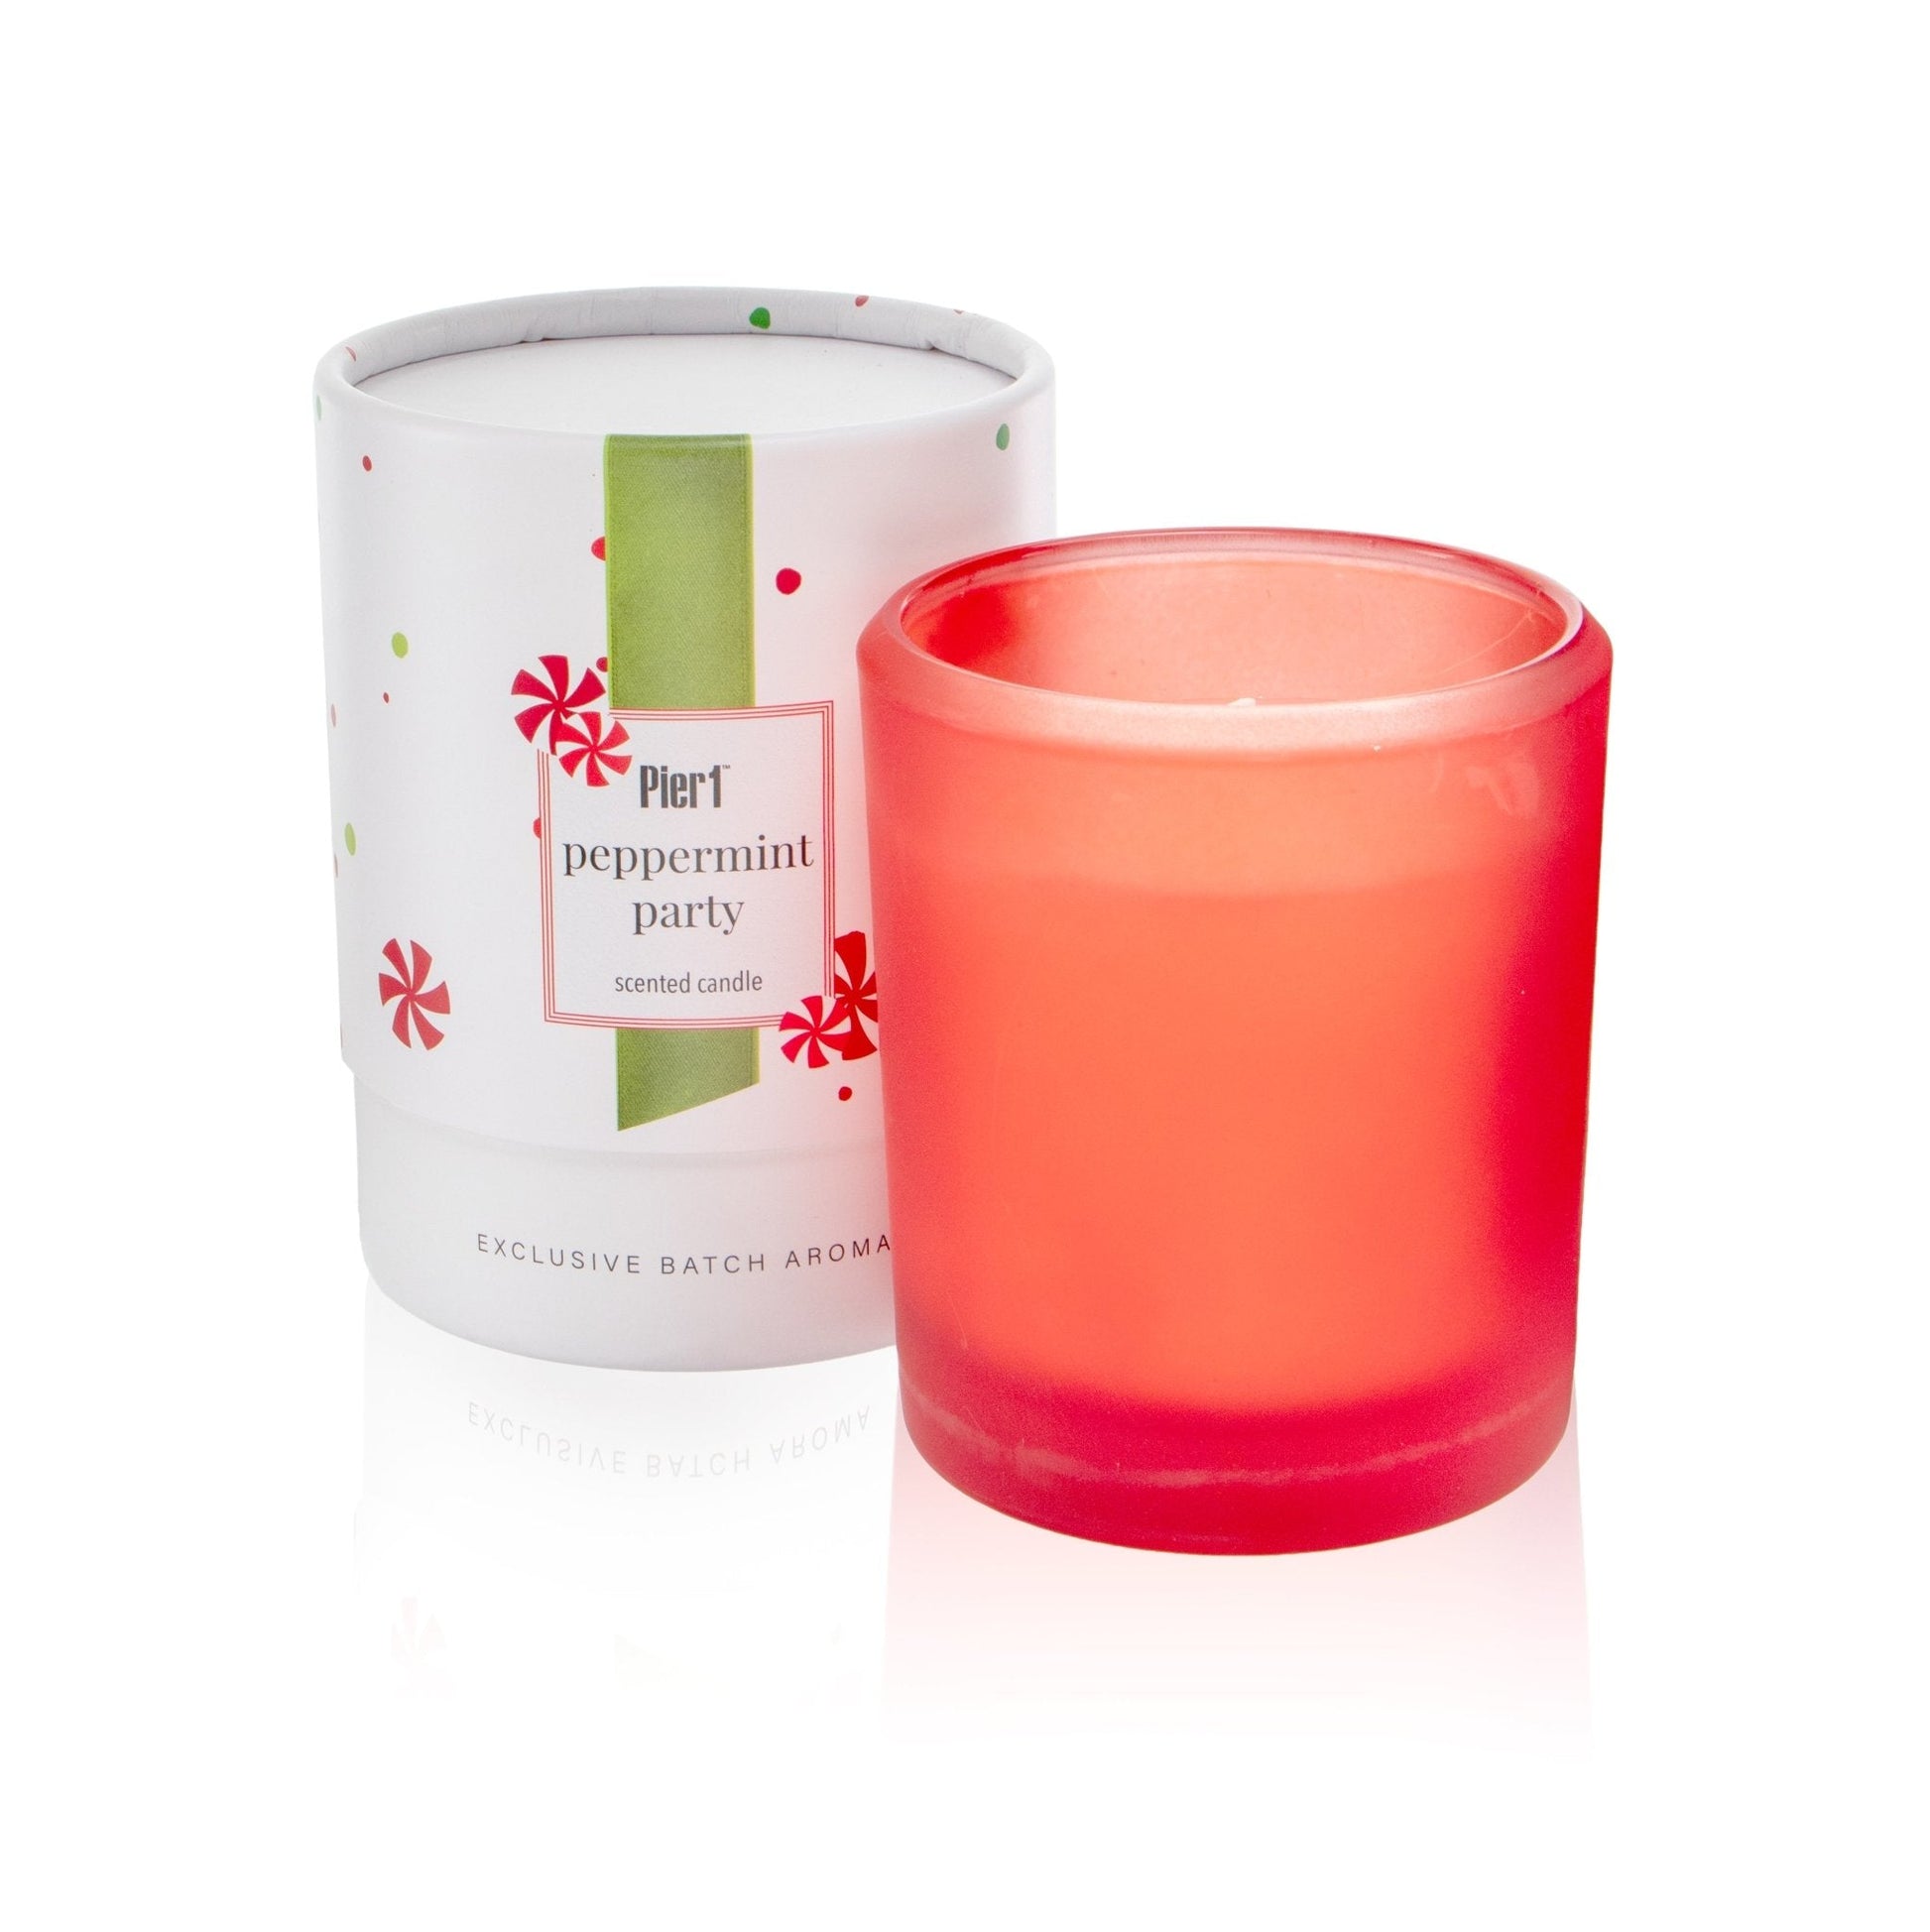 Pier 1 Peppermint Party 8oz Boxed Soy Candle - Pier 1